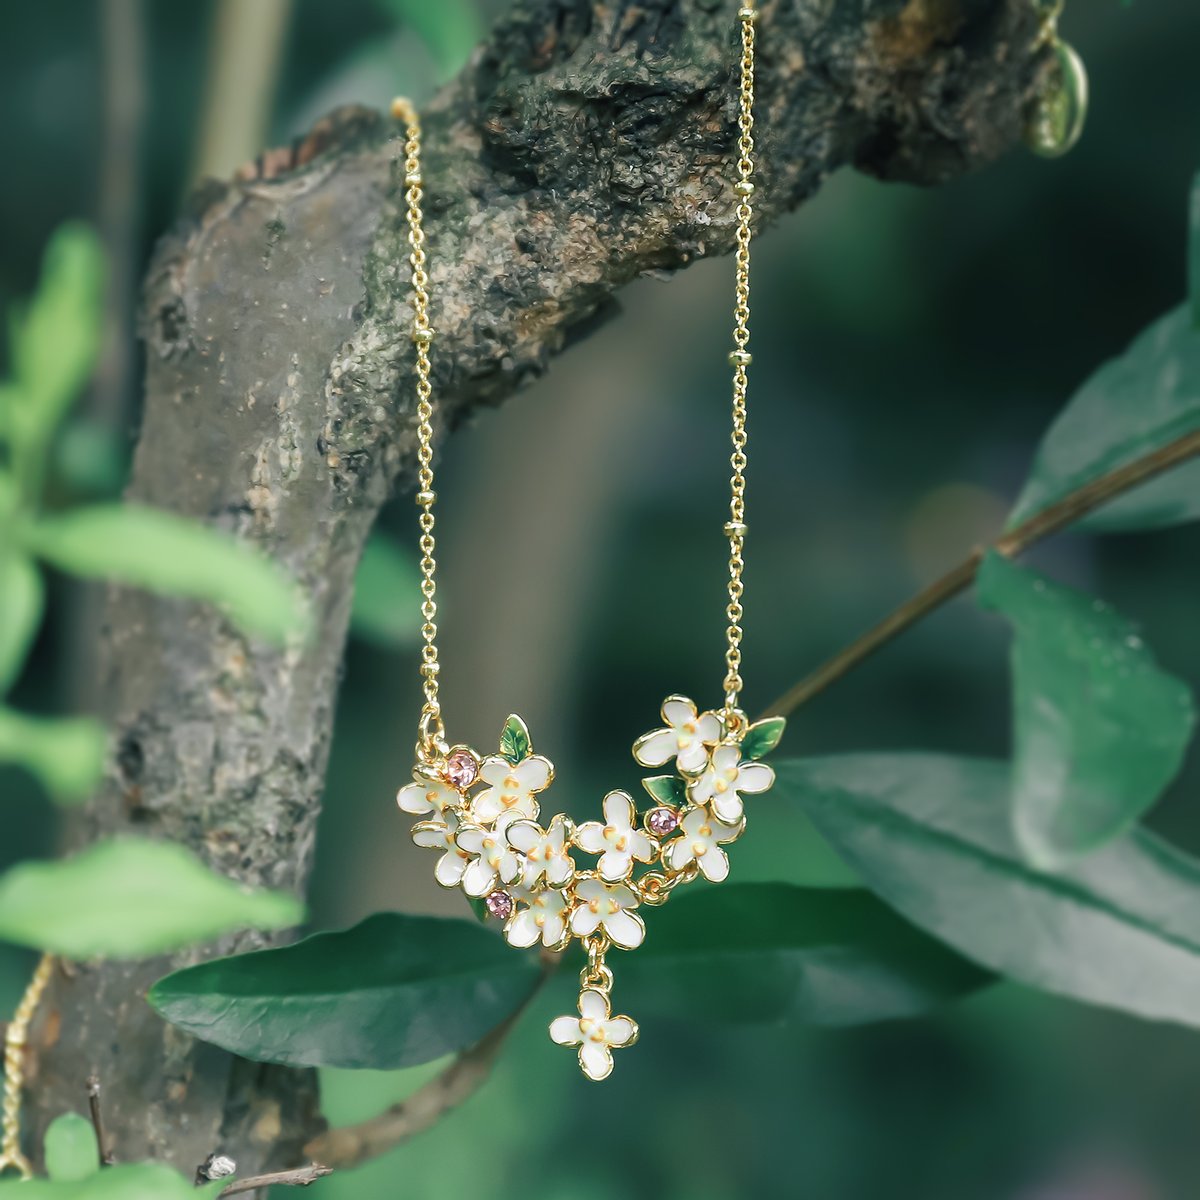 Osmanthus Fragrans Necklace captures the essence of nature and provides a unique and refined touch of luxury.🍃

Shop in the link🔗selenichast.com/collections/os…
#selenichast #selenichastjewel #osmanthusblossom #osmanthusnecklace #flowerjewelry #flowerslovers #cottagecore #naturejewels